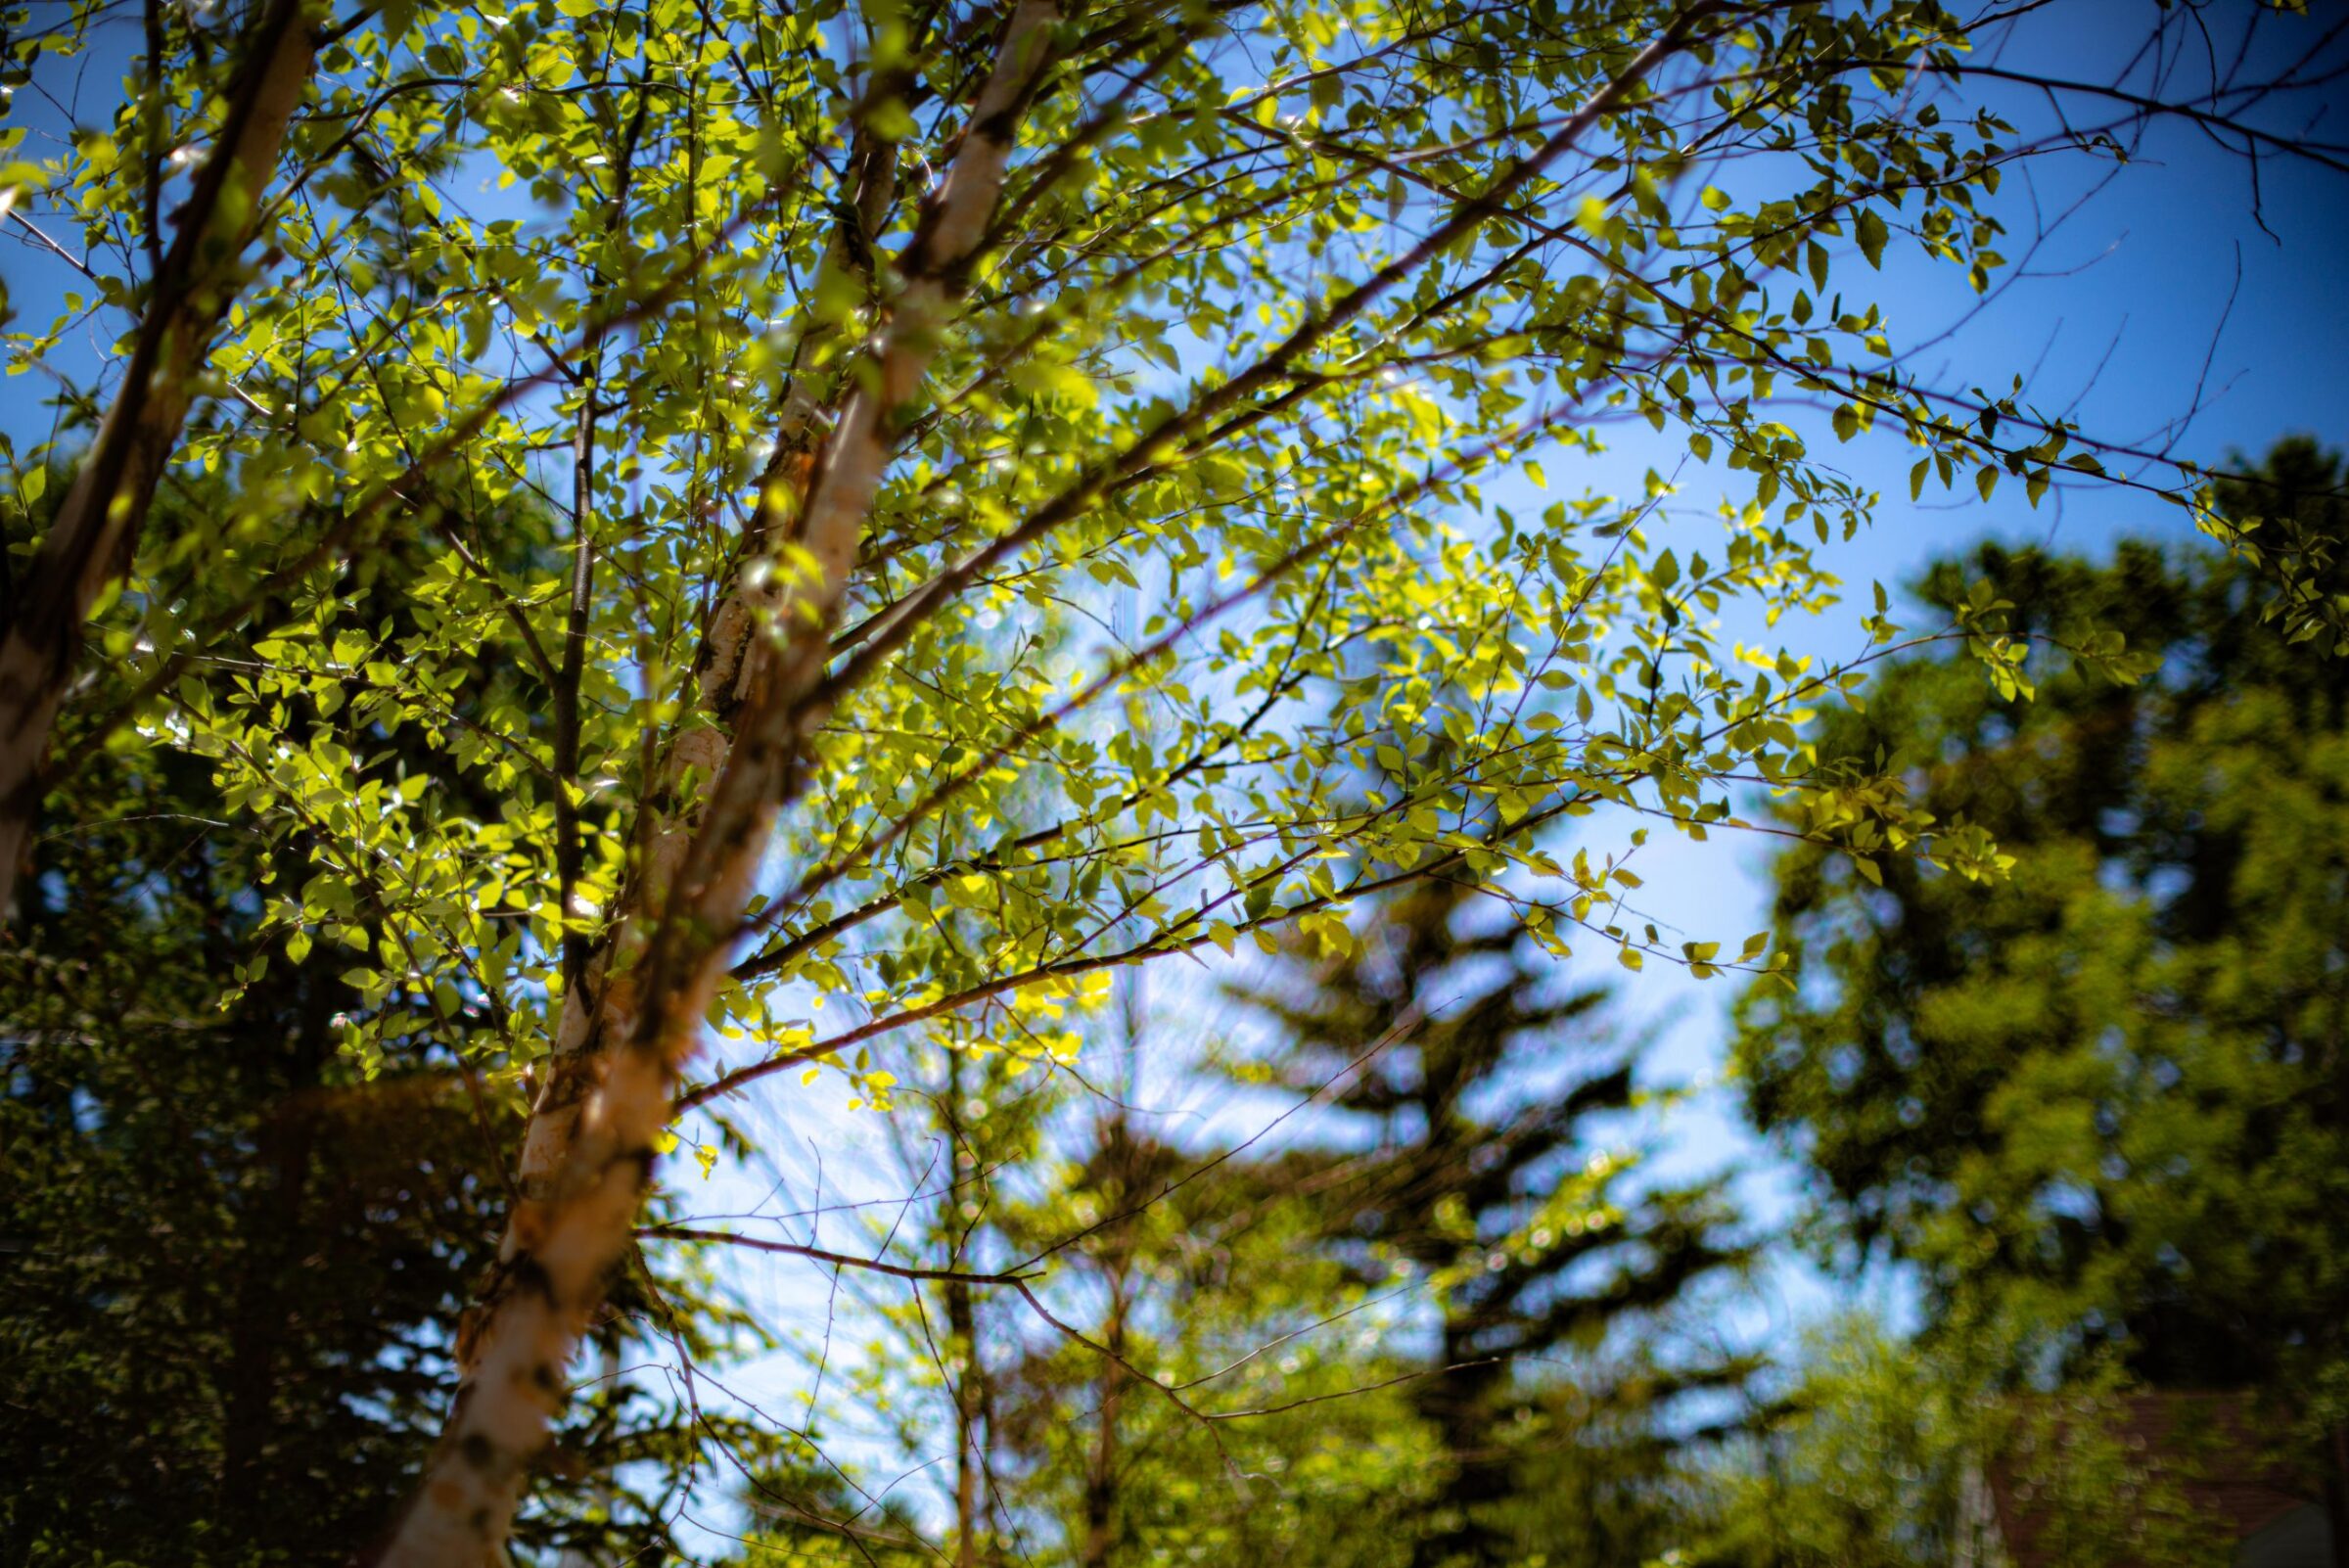 The image captures sunlit green leaves on slender branches against a vivid blue sky, with blurred trees and foliage in the background.